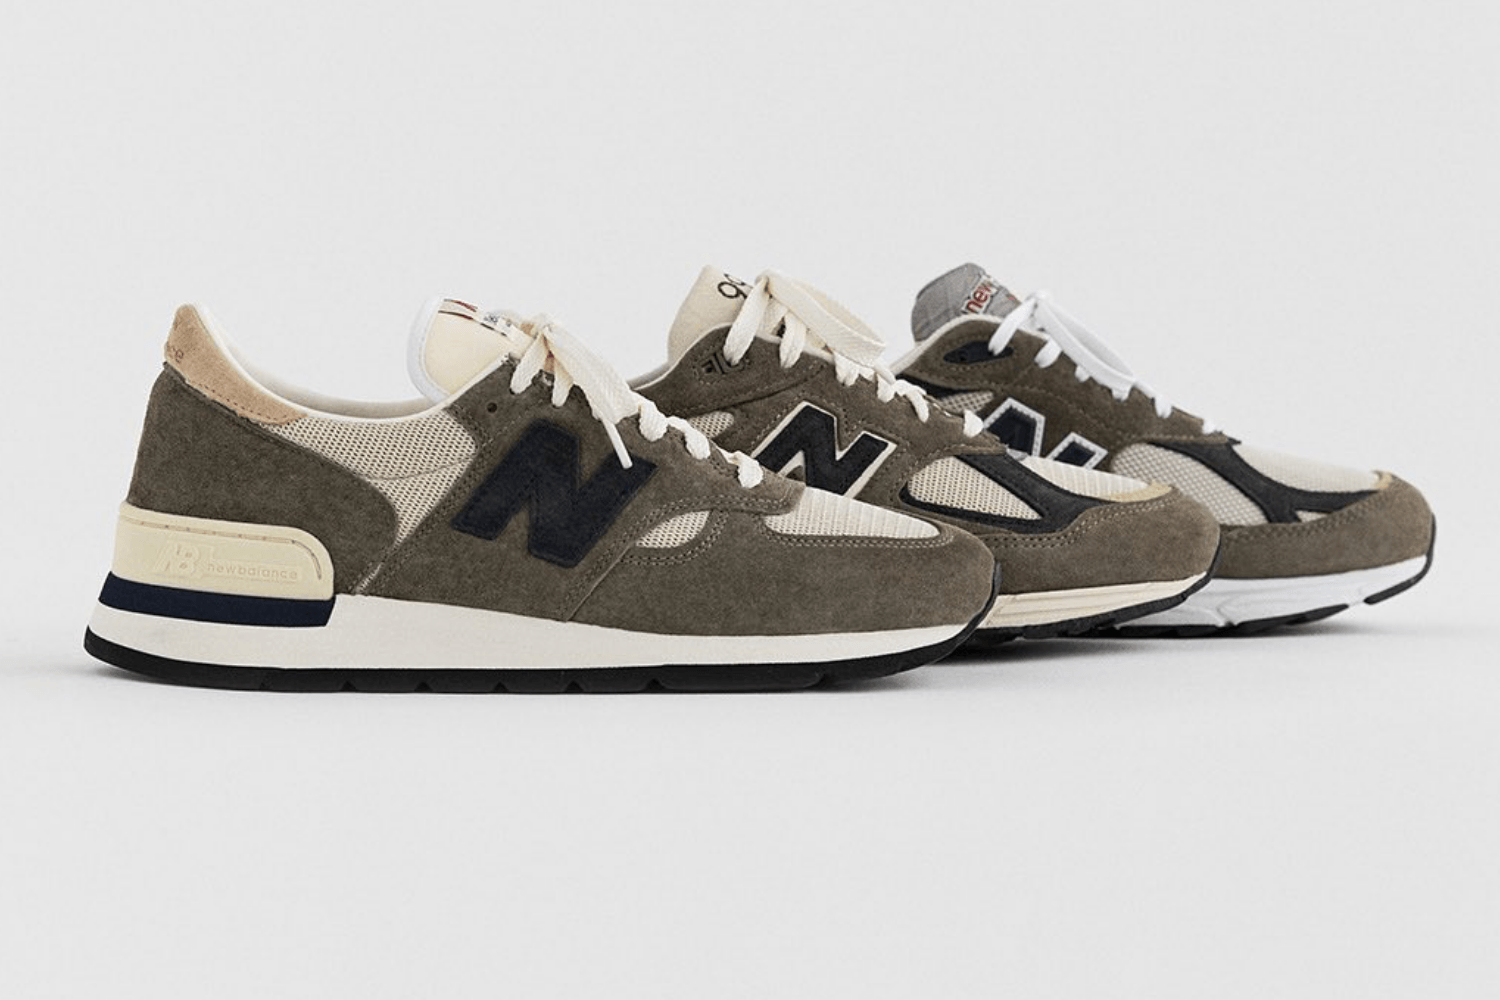 Hoe style ik het New Balance Made in USA 'Tan' pack